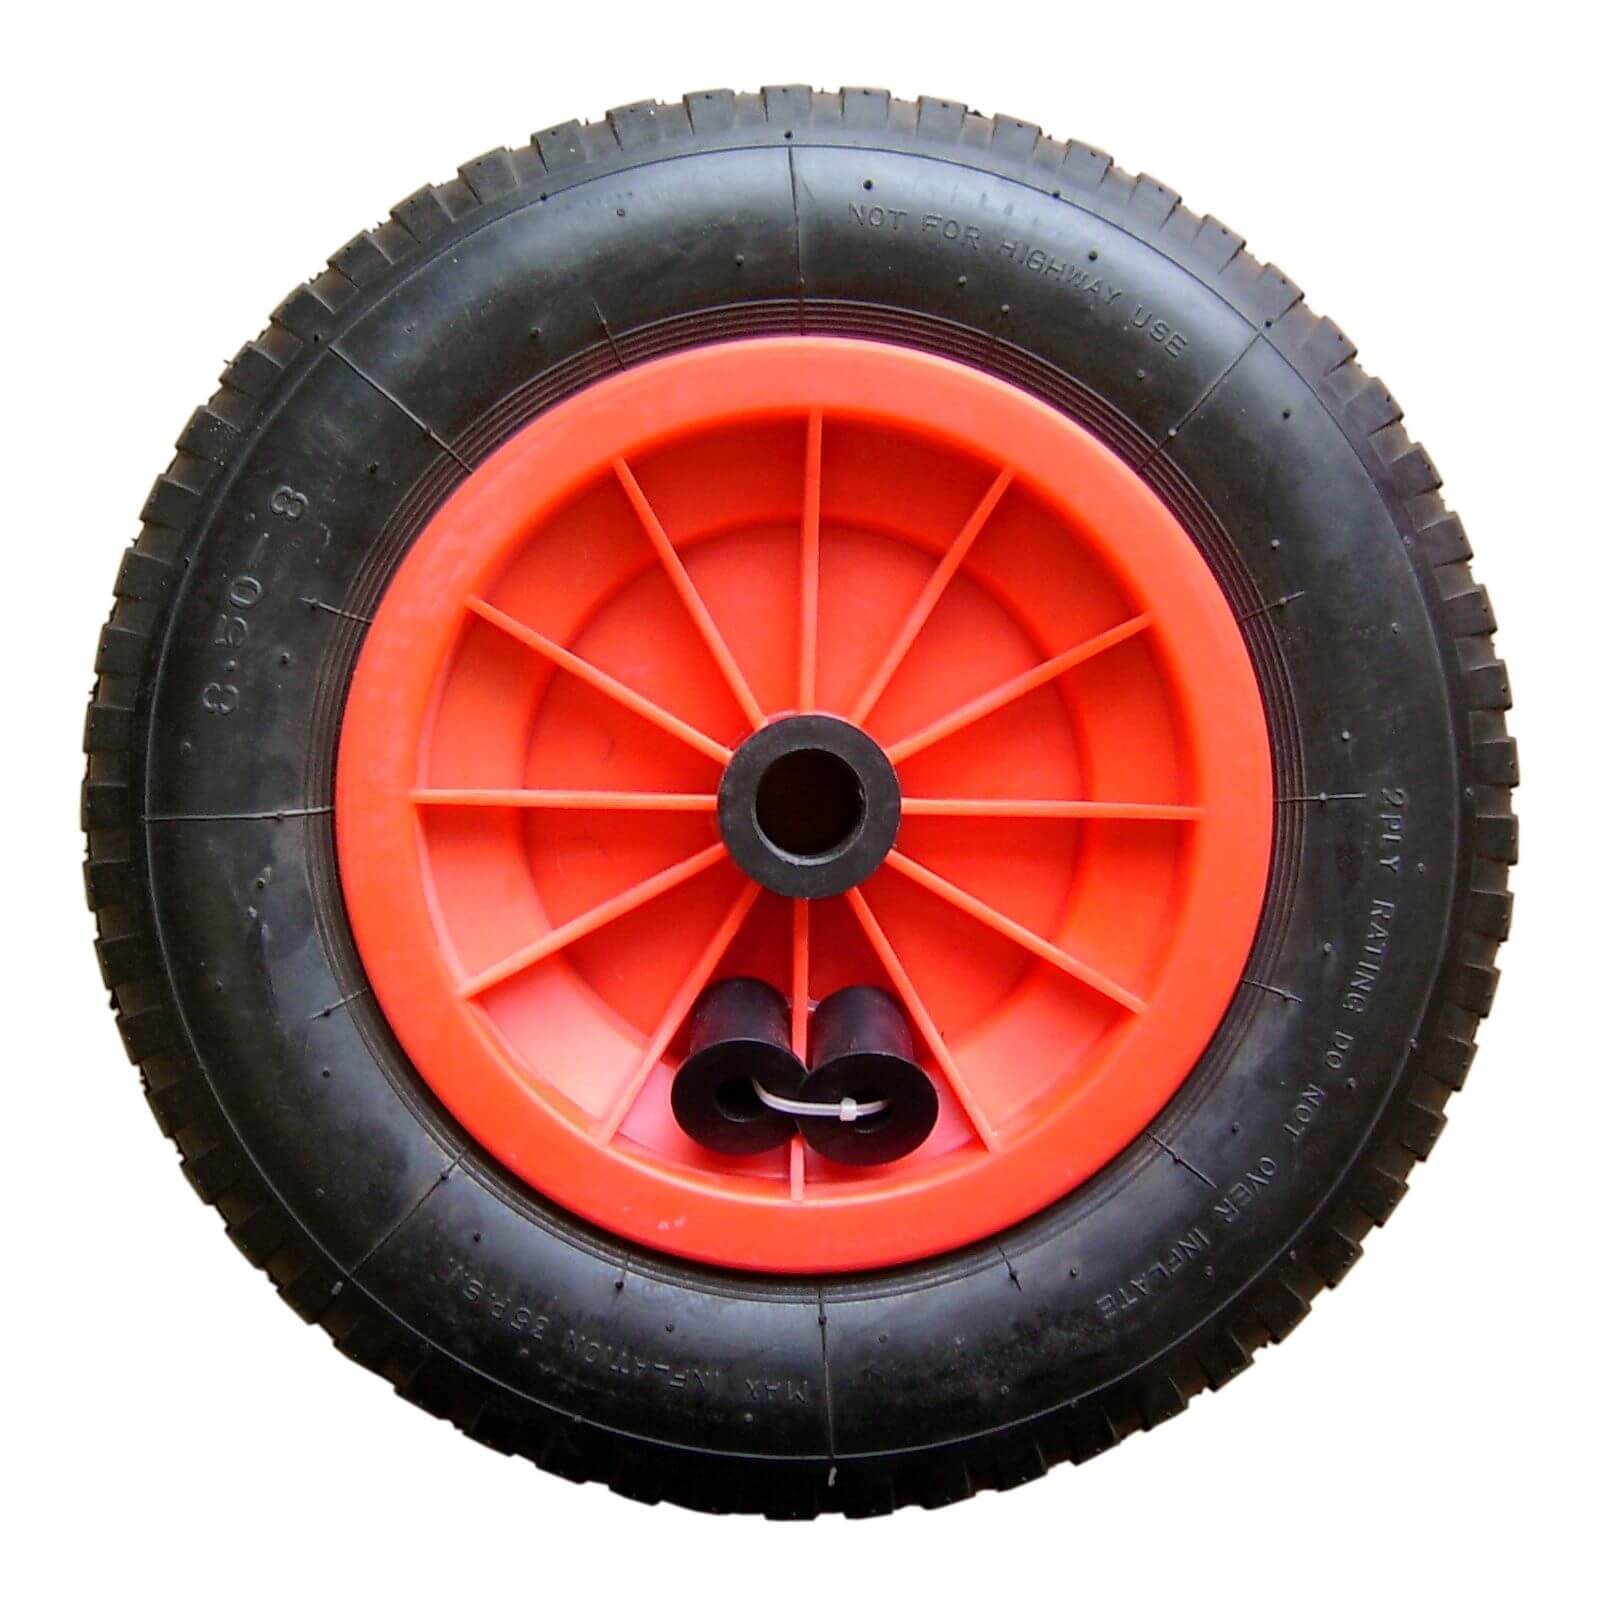 Photo of Wheel - 165mm - 1 Pack